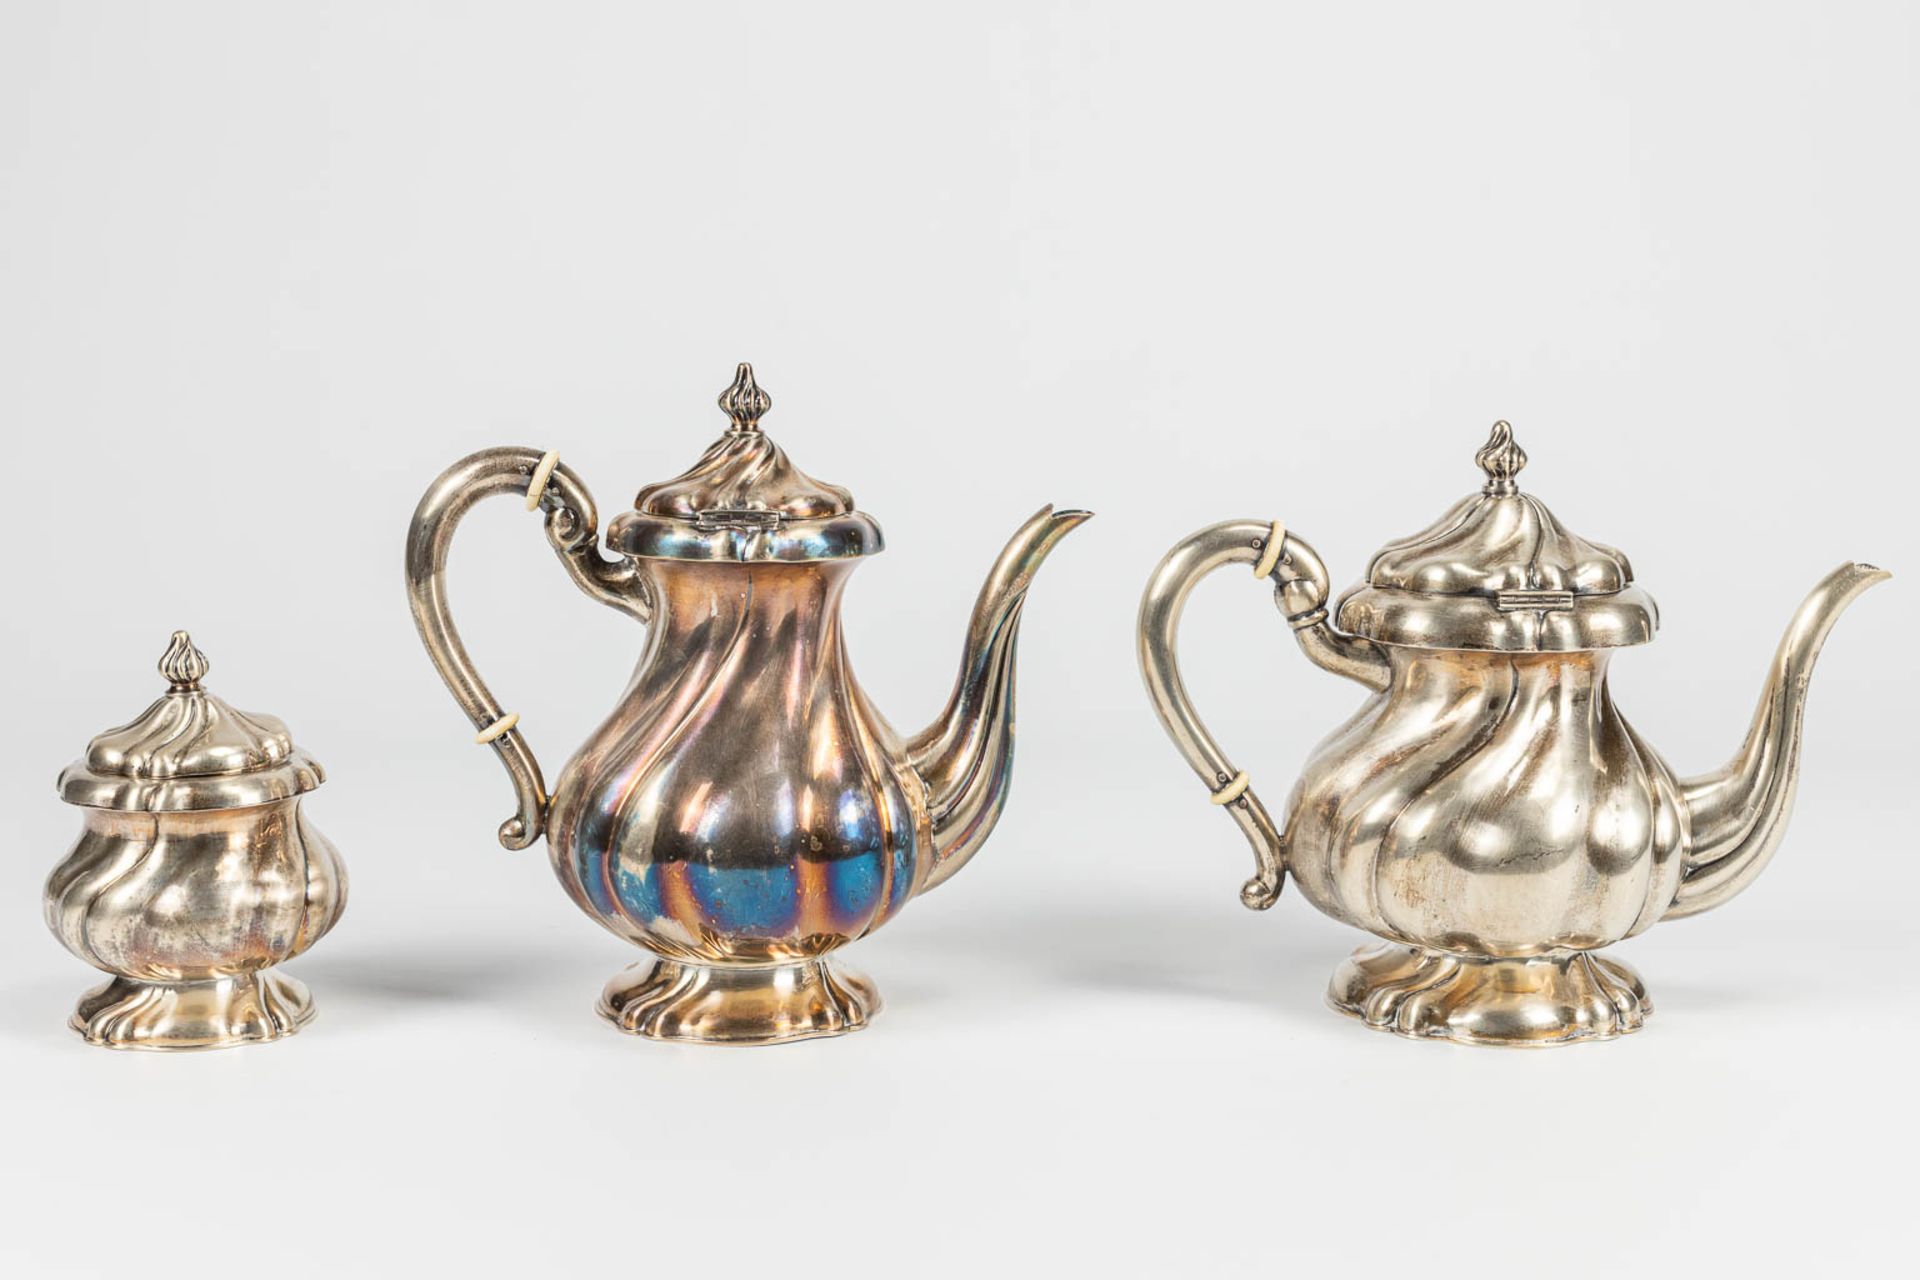 A 4-piece coffee and tea service made of silver on a silver-plated tray. - Image 8 of 14